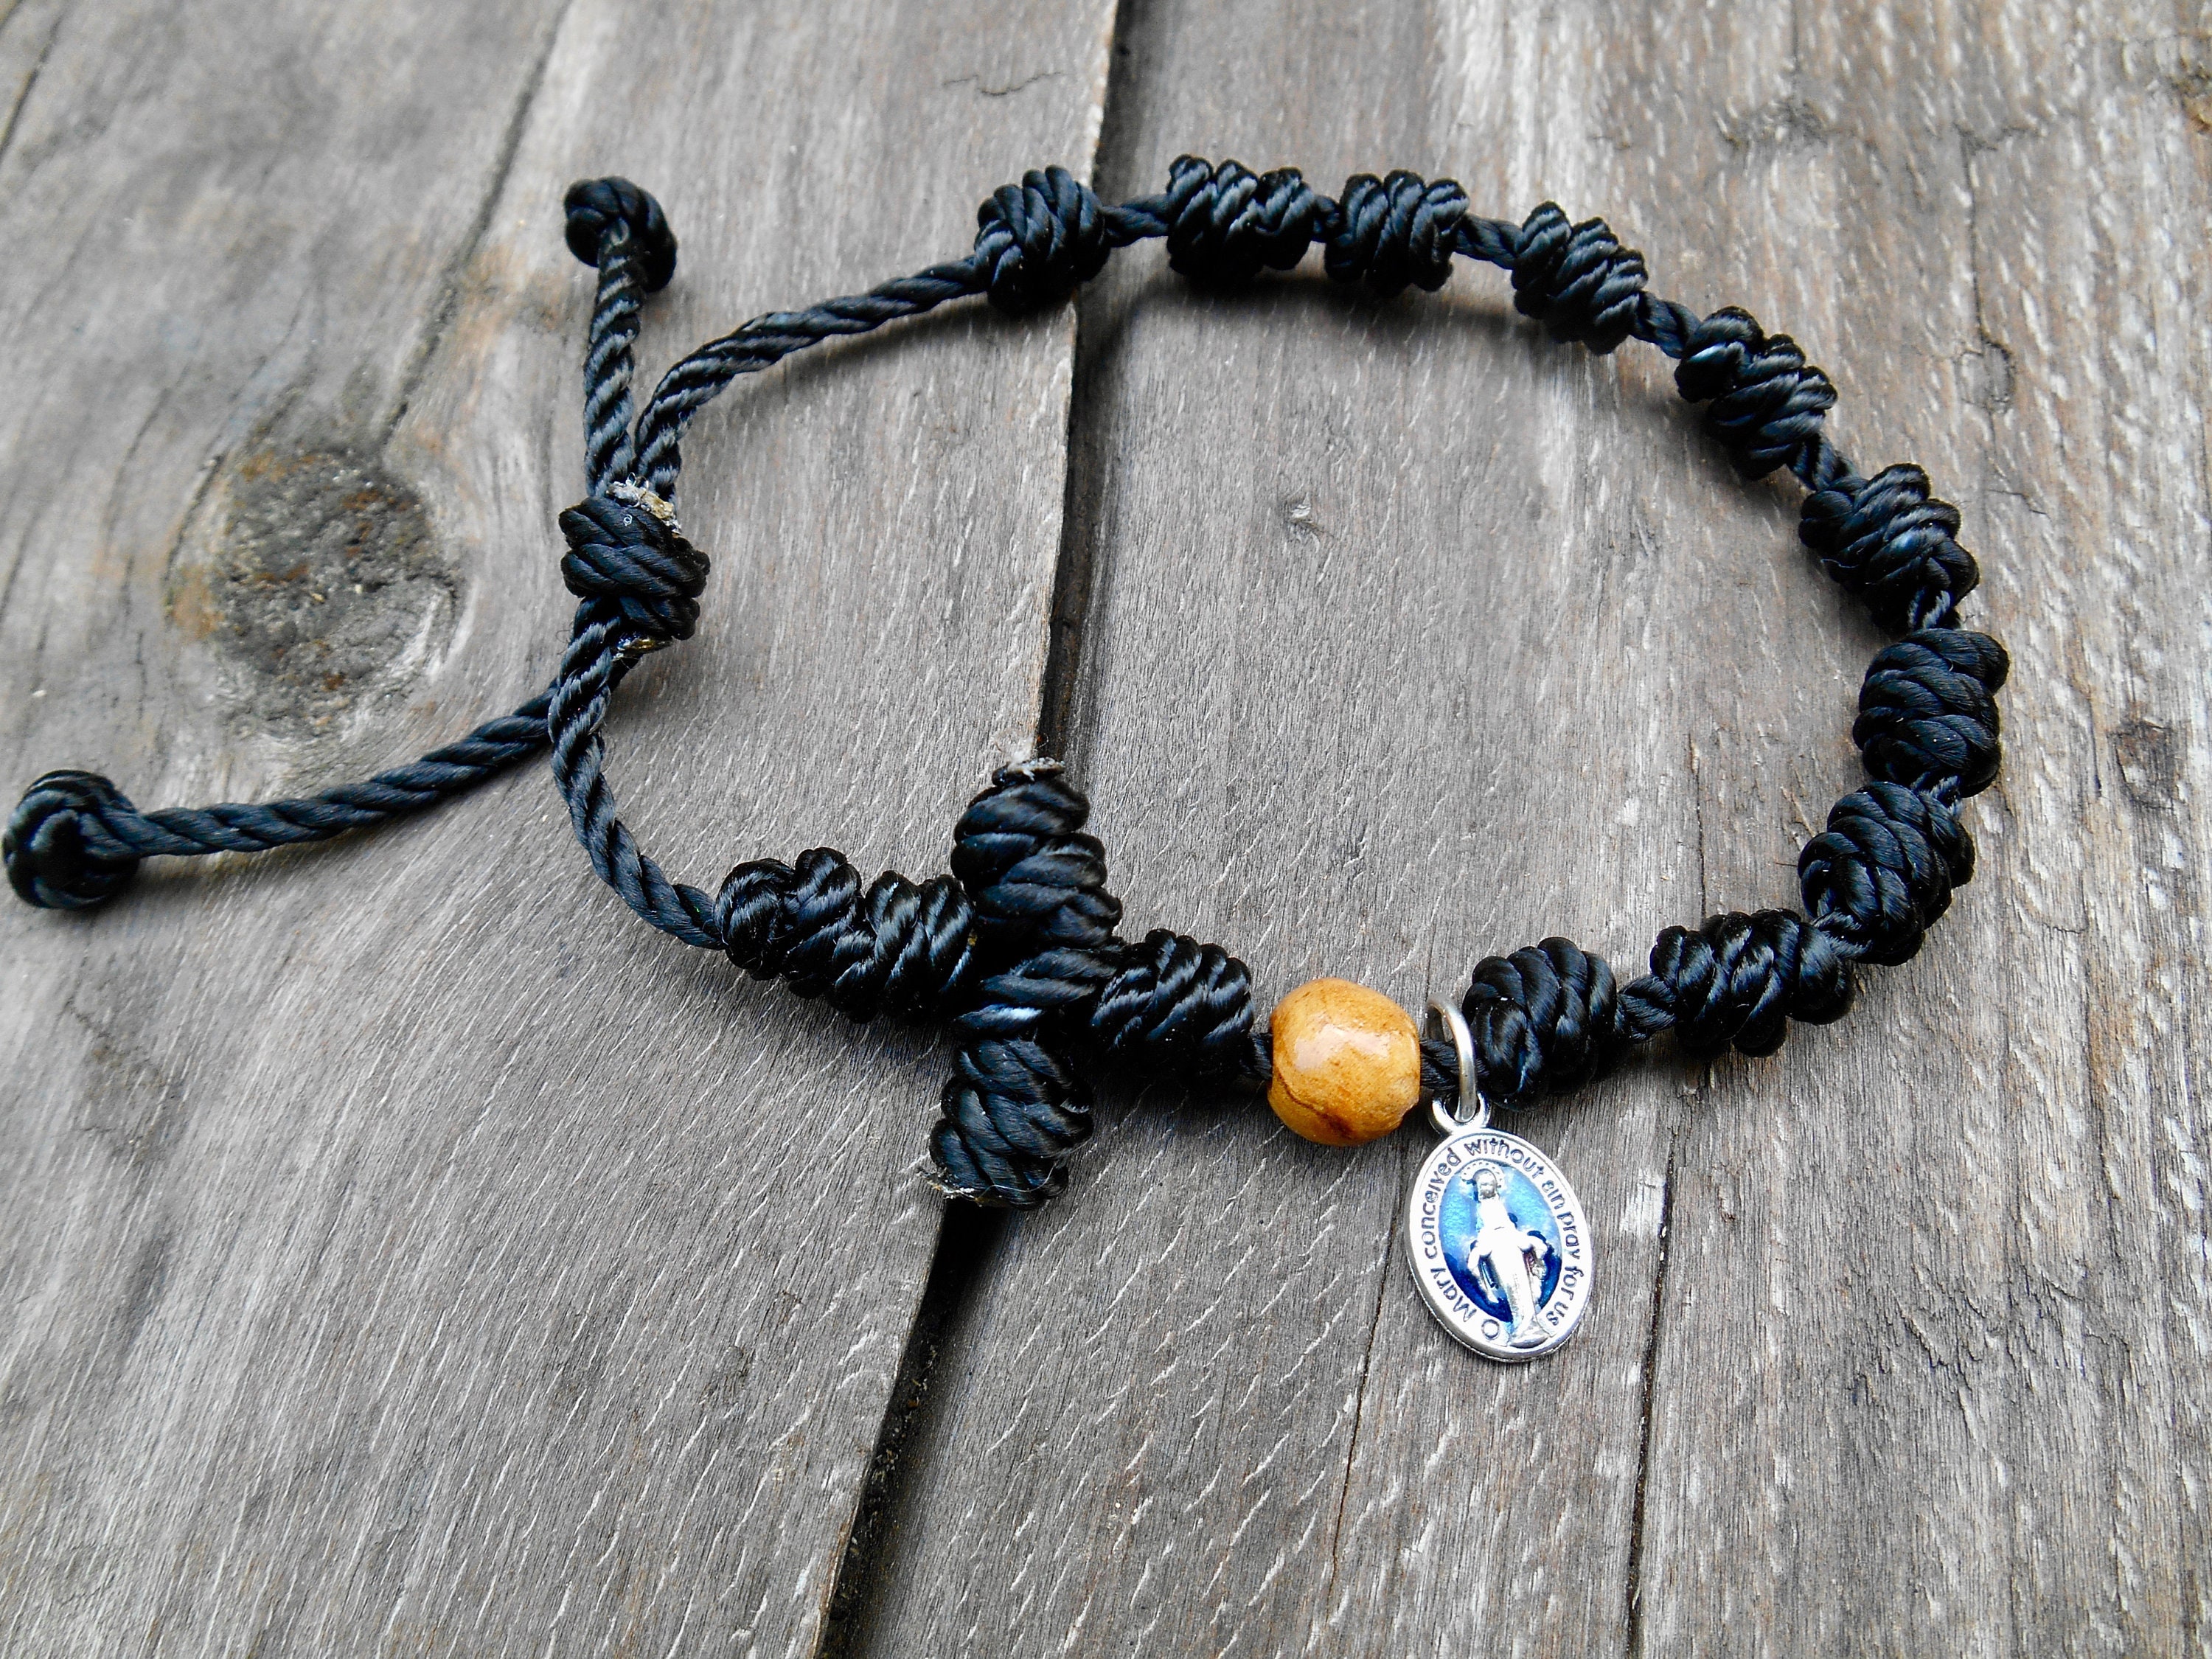 Knotted Rosary Bracelet, Black Cord Rosary, Pocket Rosary, Catholic Gift,  Single Decade, Confirmation Gift, Twine Rosary, Olive Wood Pater -   Singapore